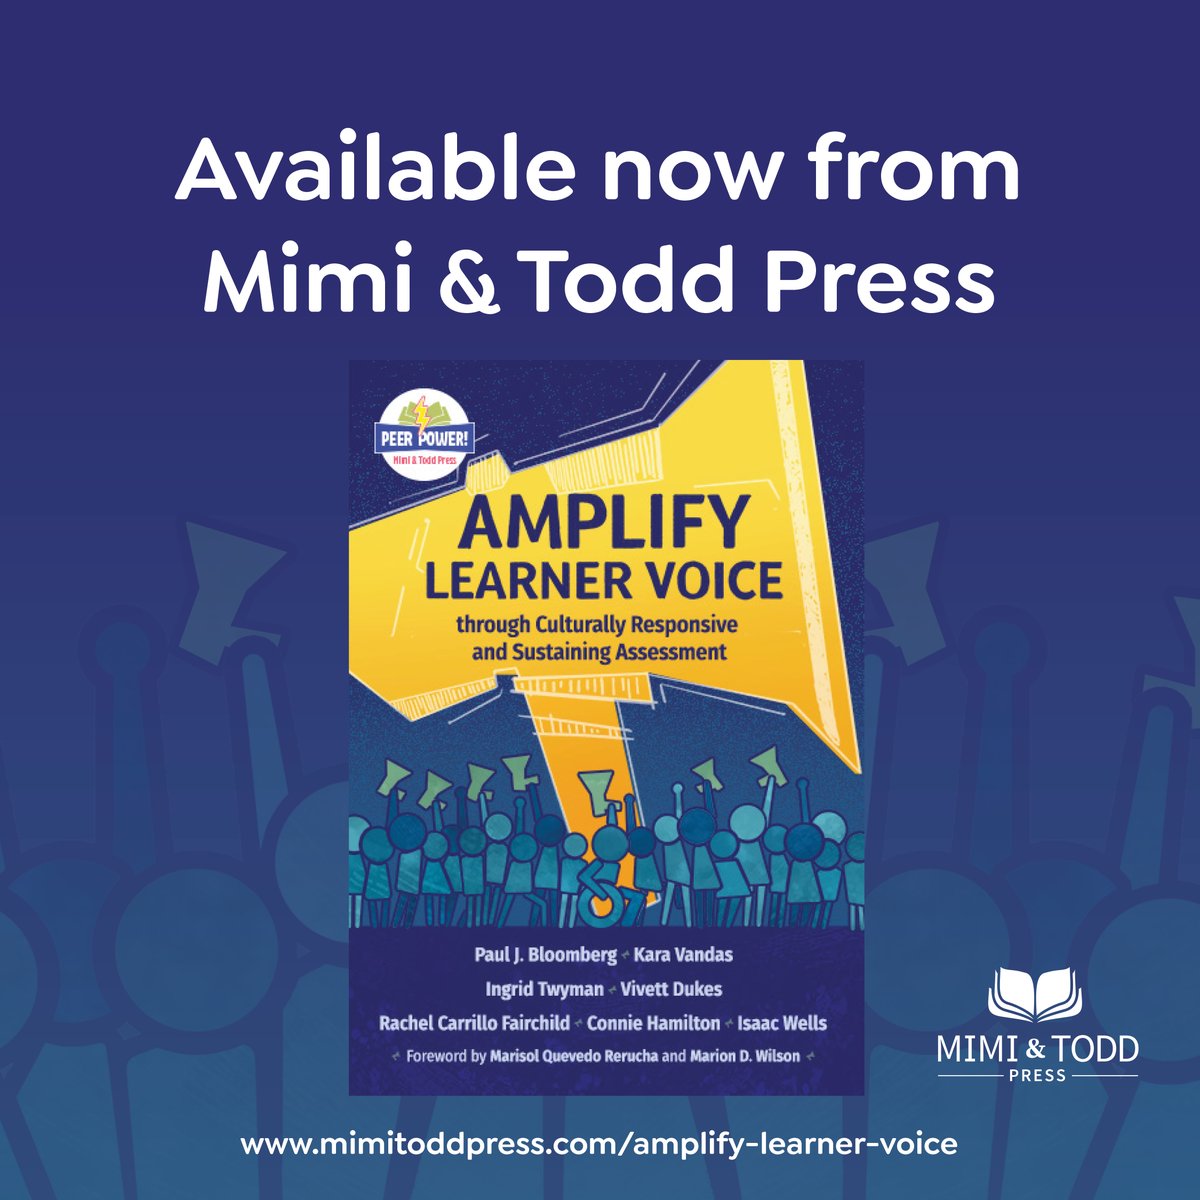 Reimagine formative assessment through an asset-based, cultural lens to make a greater impact on learning and our shared humanity. #AmplifyLearnerVoice @vivettdukes @bloomberg_paul 

Learn more and even get a sneak peek at this fresh take on assessment at bit.ly/47pihgt.